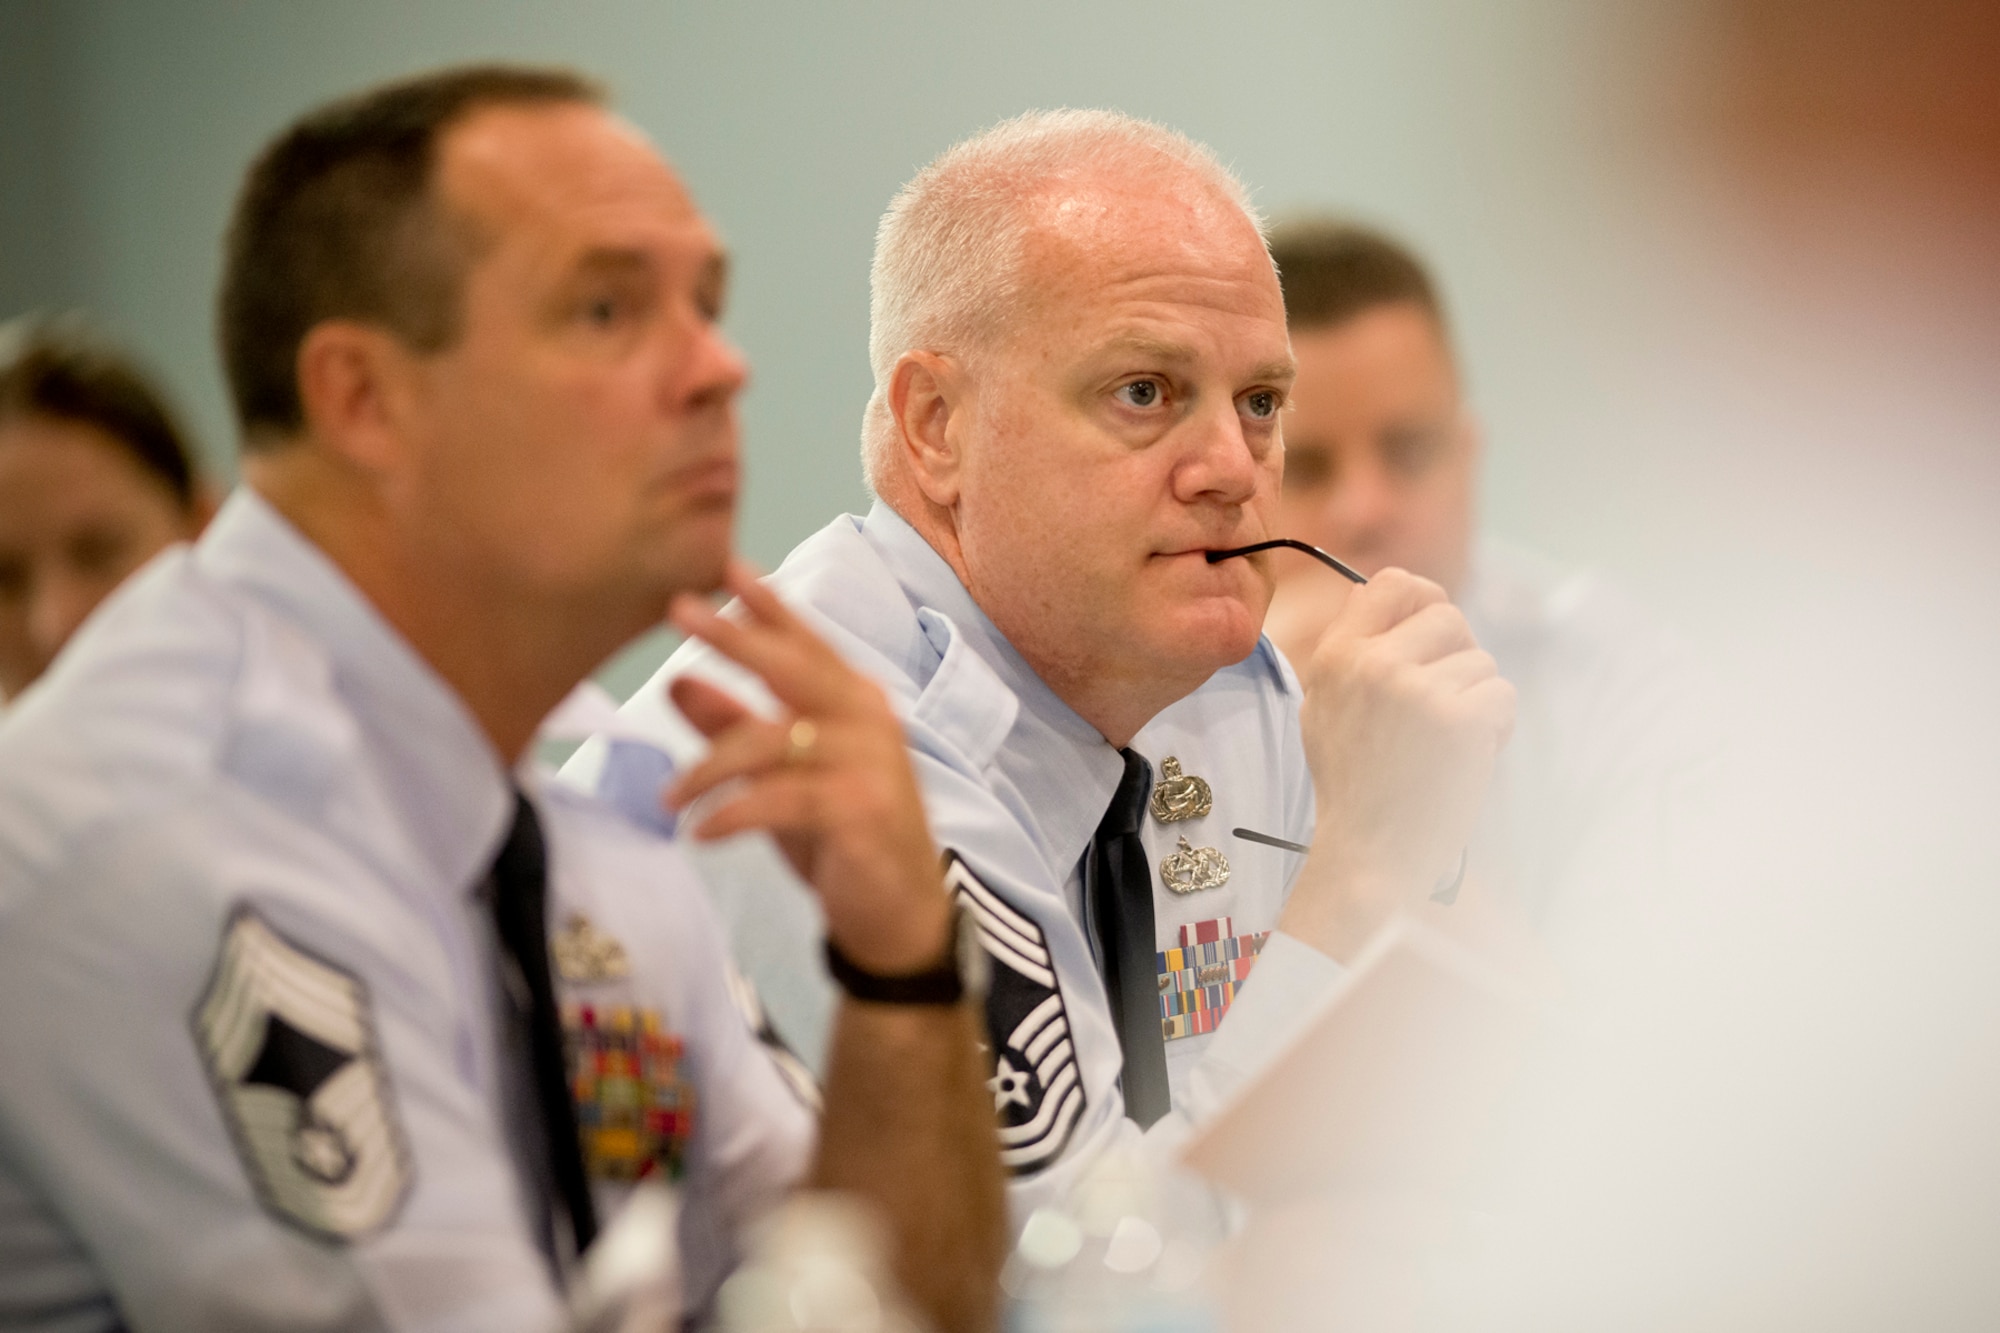 Chief Master Sgt. Dayne Peterson listens to a briefing by Chief Master Sgt. James W. Hotaling, the command chief of the Air National Guard, as he addresses the Chief's Executive Course at Joint Base Andrews, Md. Aug. 4, 2014. The CEC provides recently-promoted chief master sergeants with a broad view of total force operations at a strategic level. (Air National Guard photo by Master Sgt. Marvin R. Preston/Released)